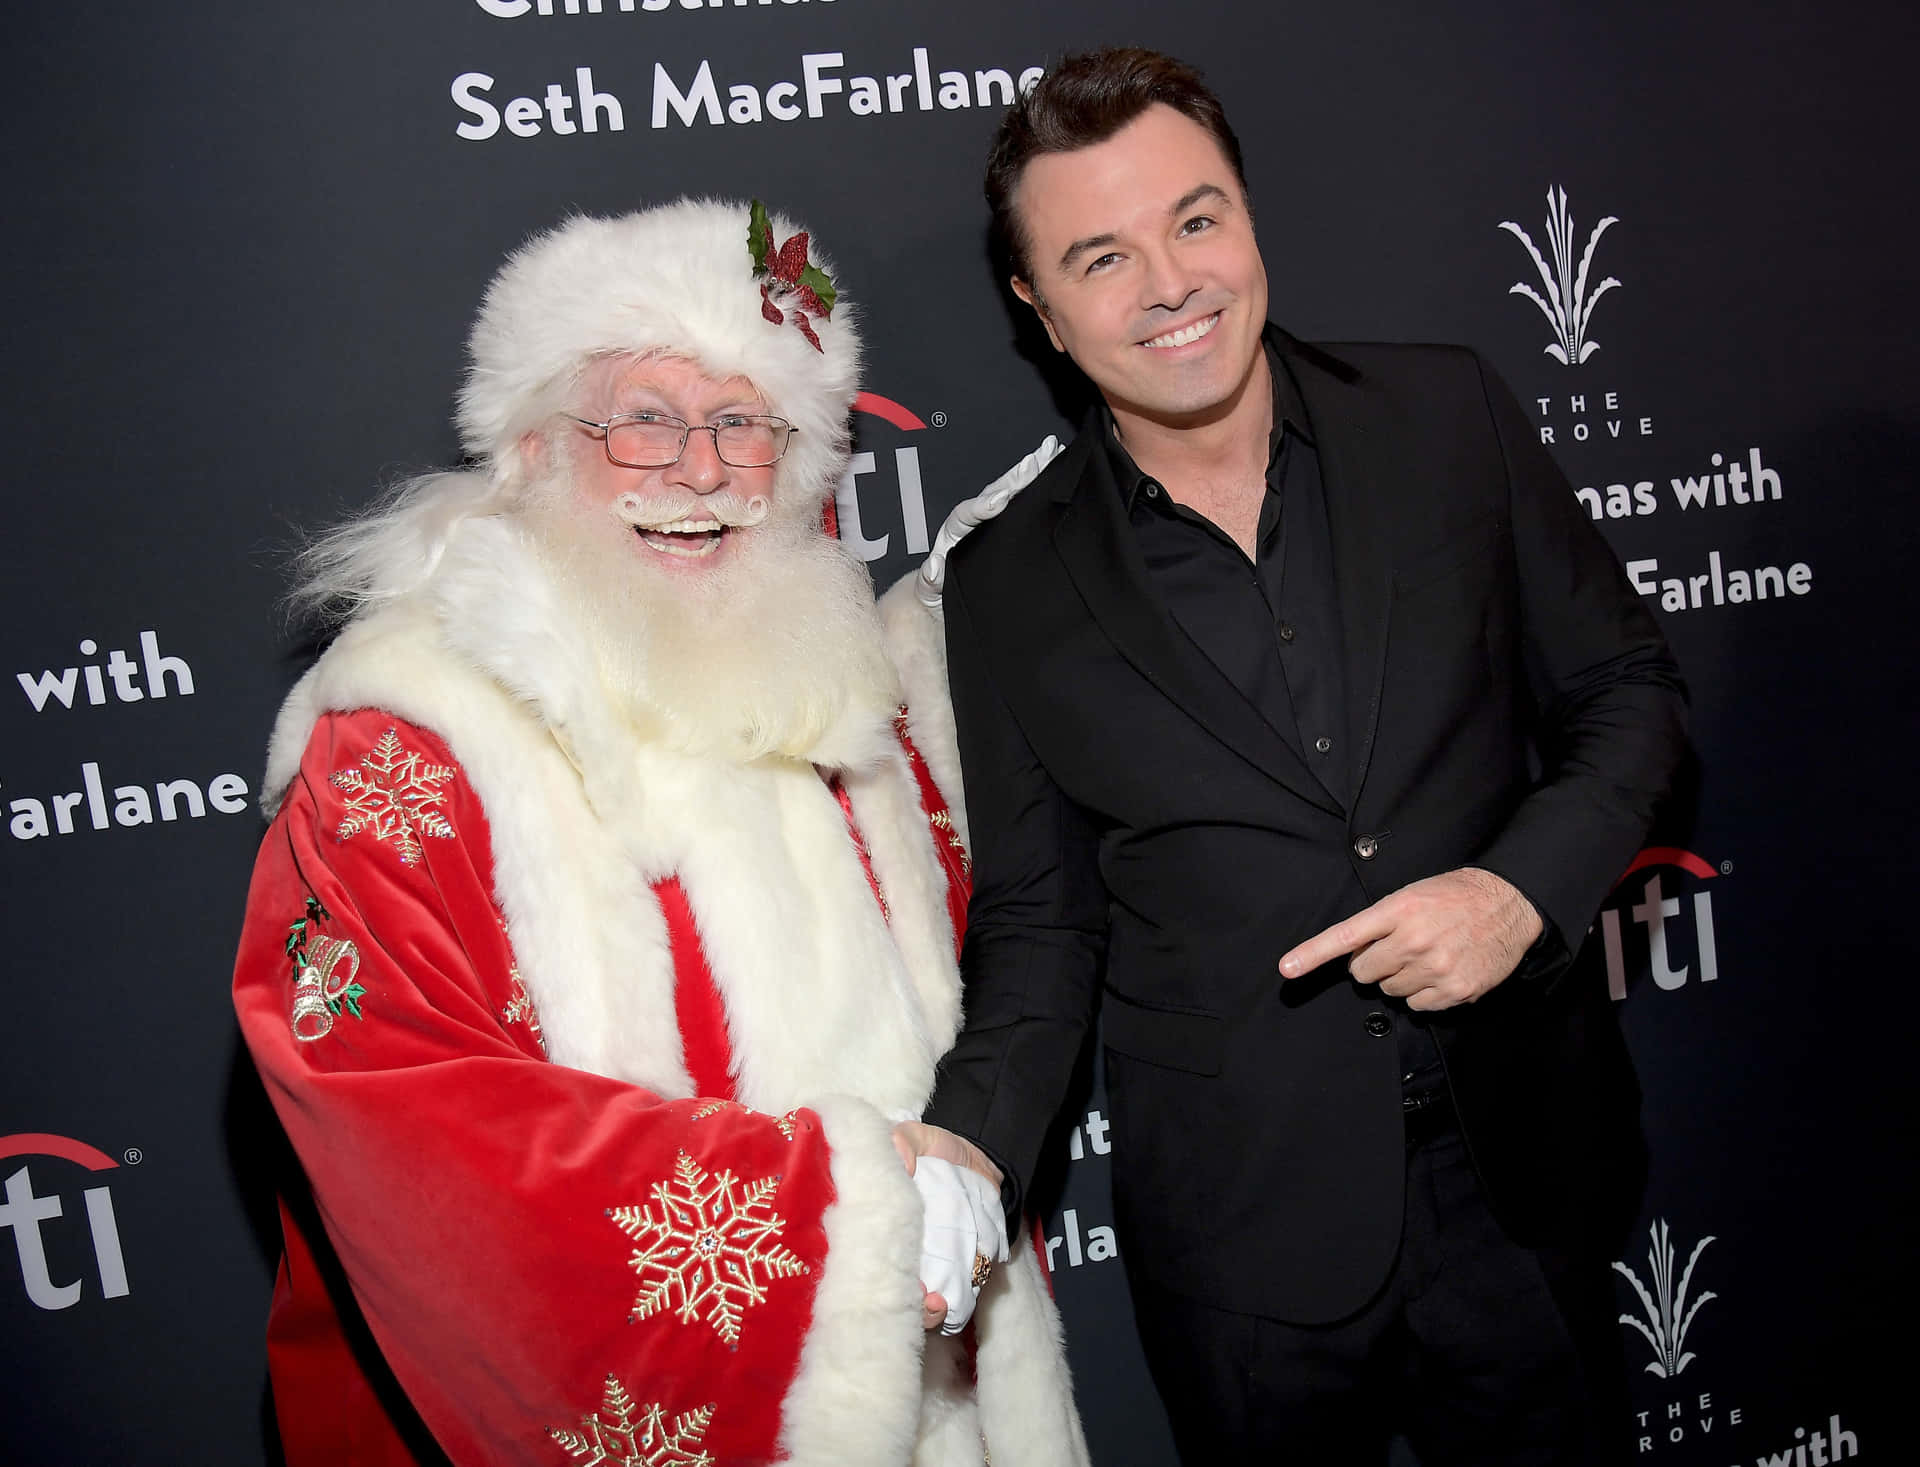 Seth MacFarlane, a renowned American actor and creator behind popular animated TV shows. Wallpaper